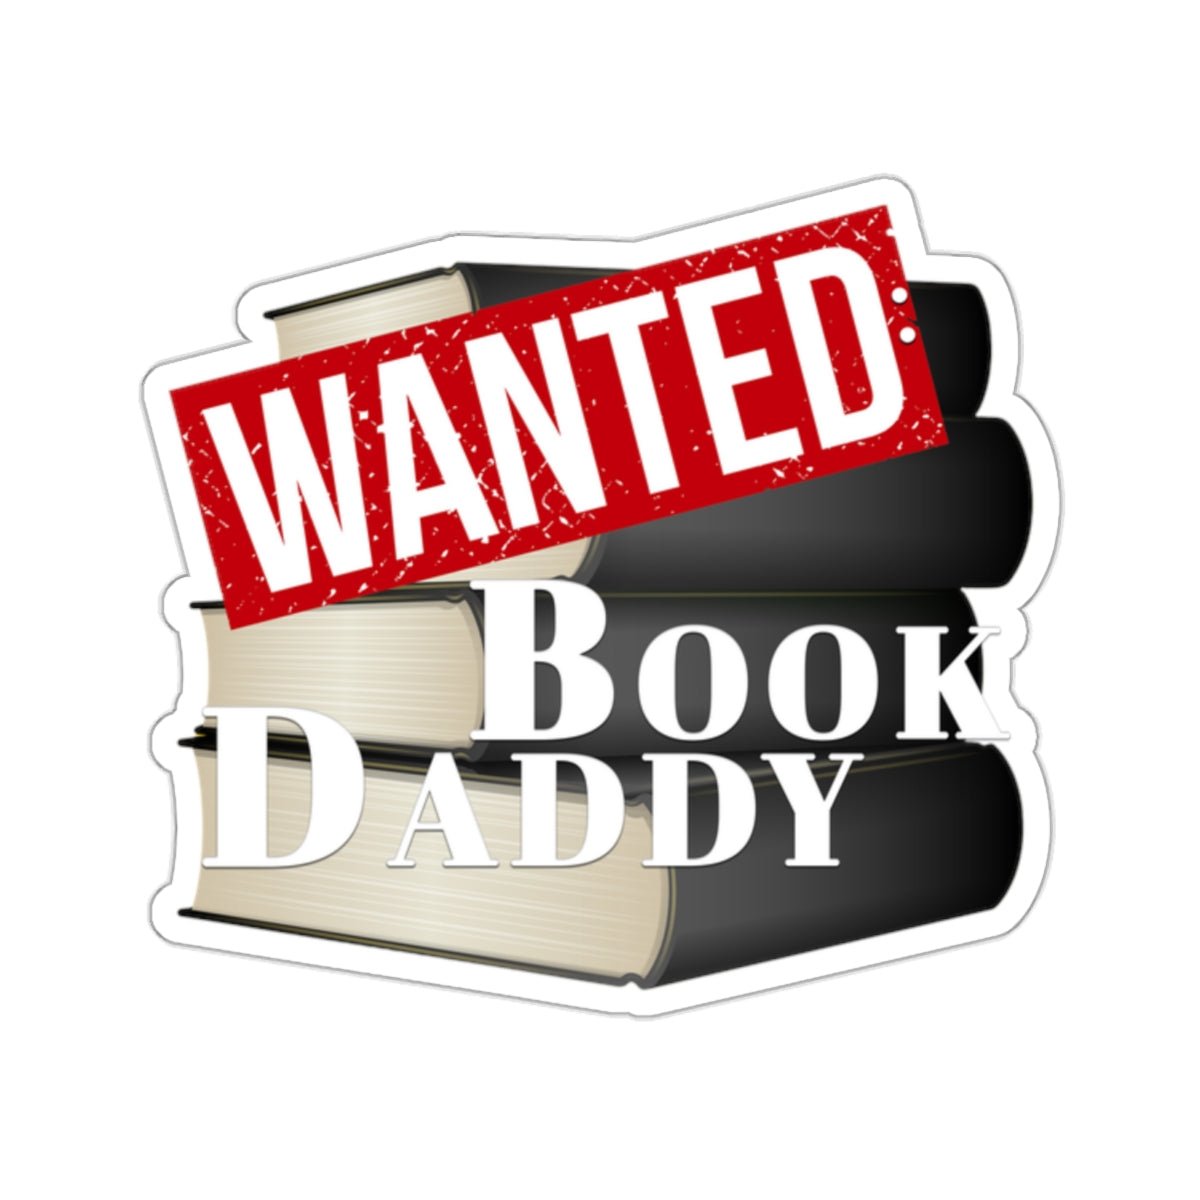 Wanted: Book Daddy - Kiss-Cut Stickers